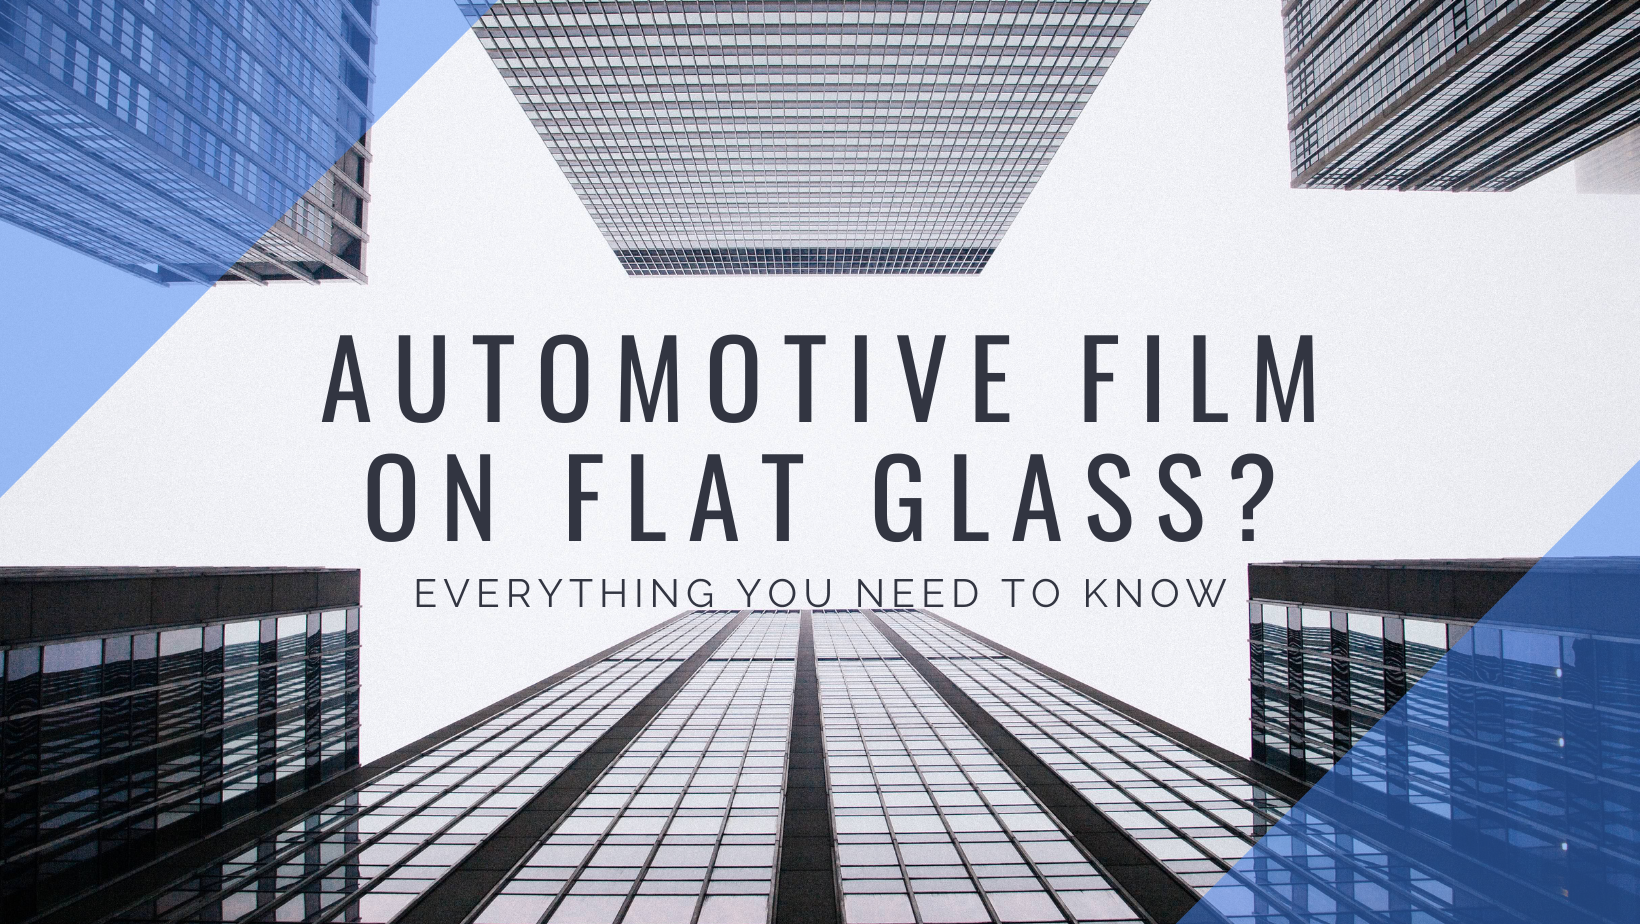 CAN AUTOMOTIVE FILM BE INSTALLED ON FLAT GLASS?